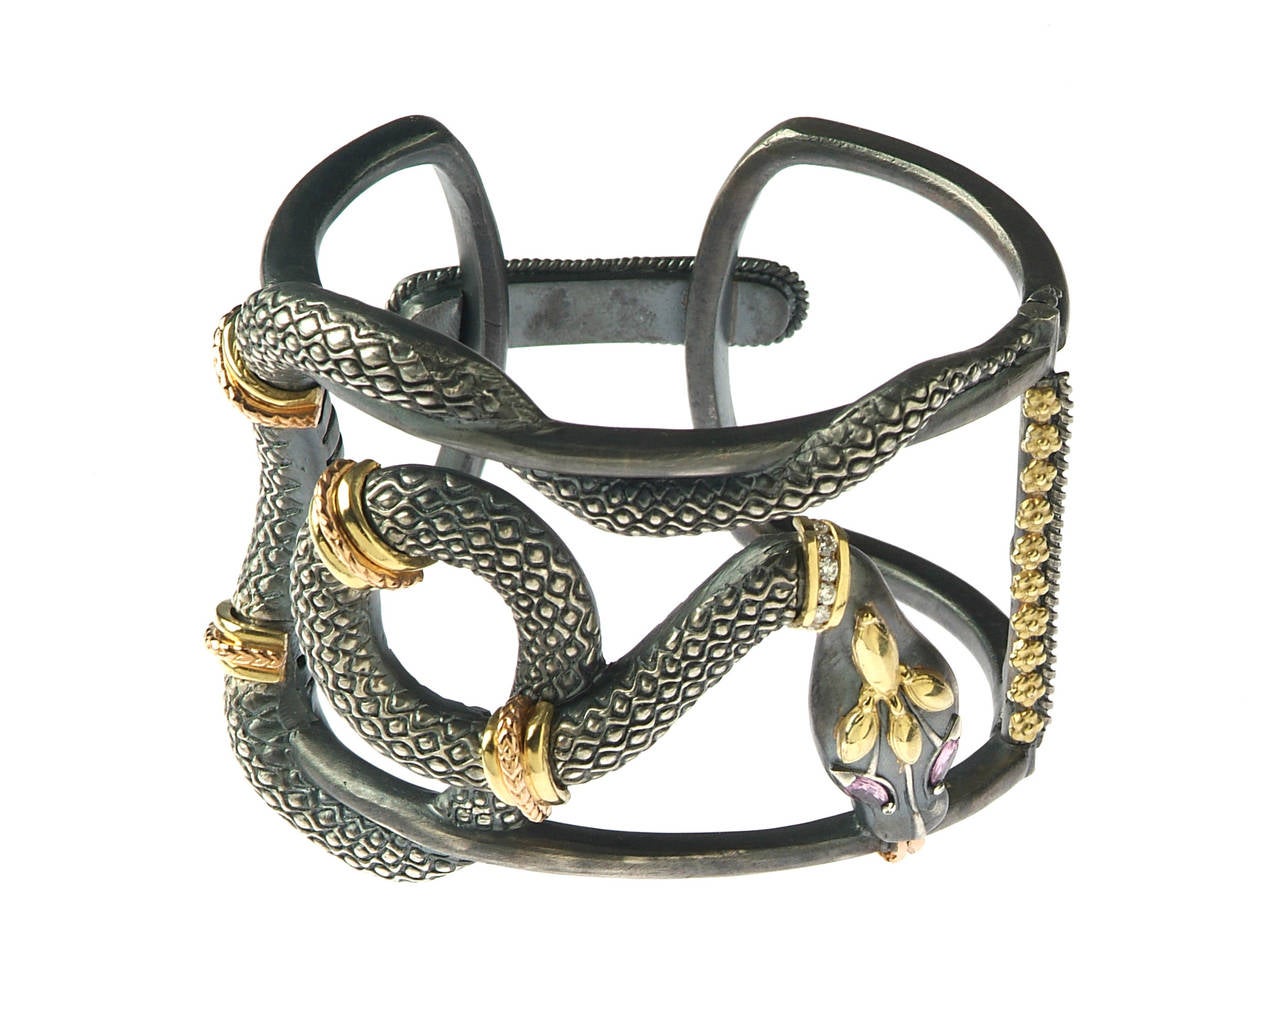 Aged Silver & 18K Gold Bangle Bracelet from our 